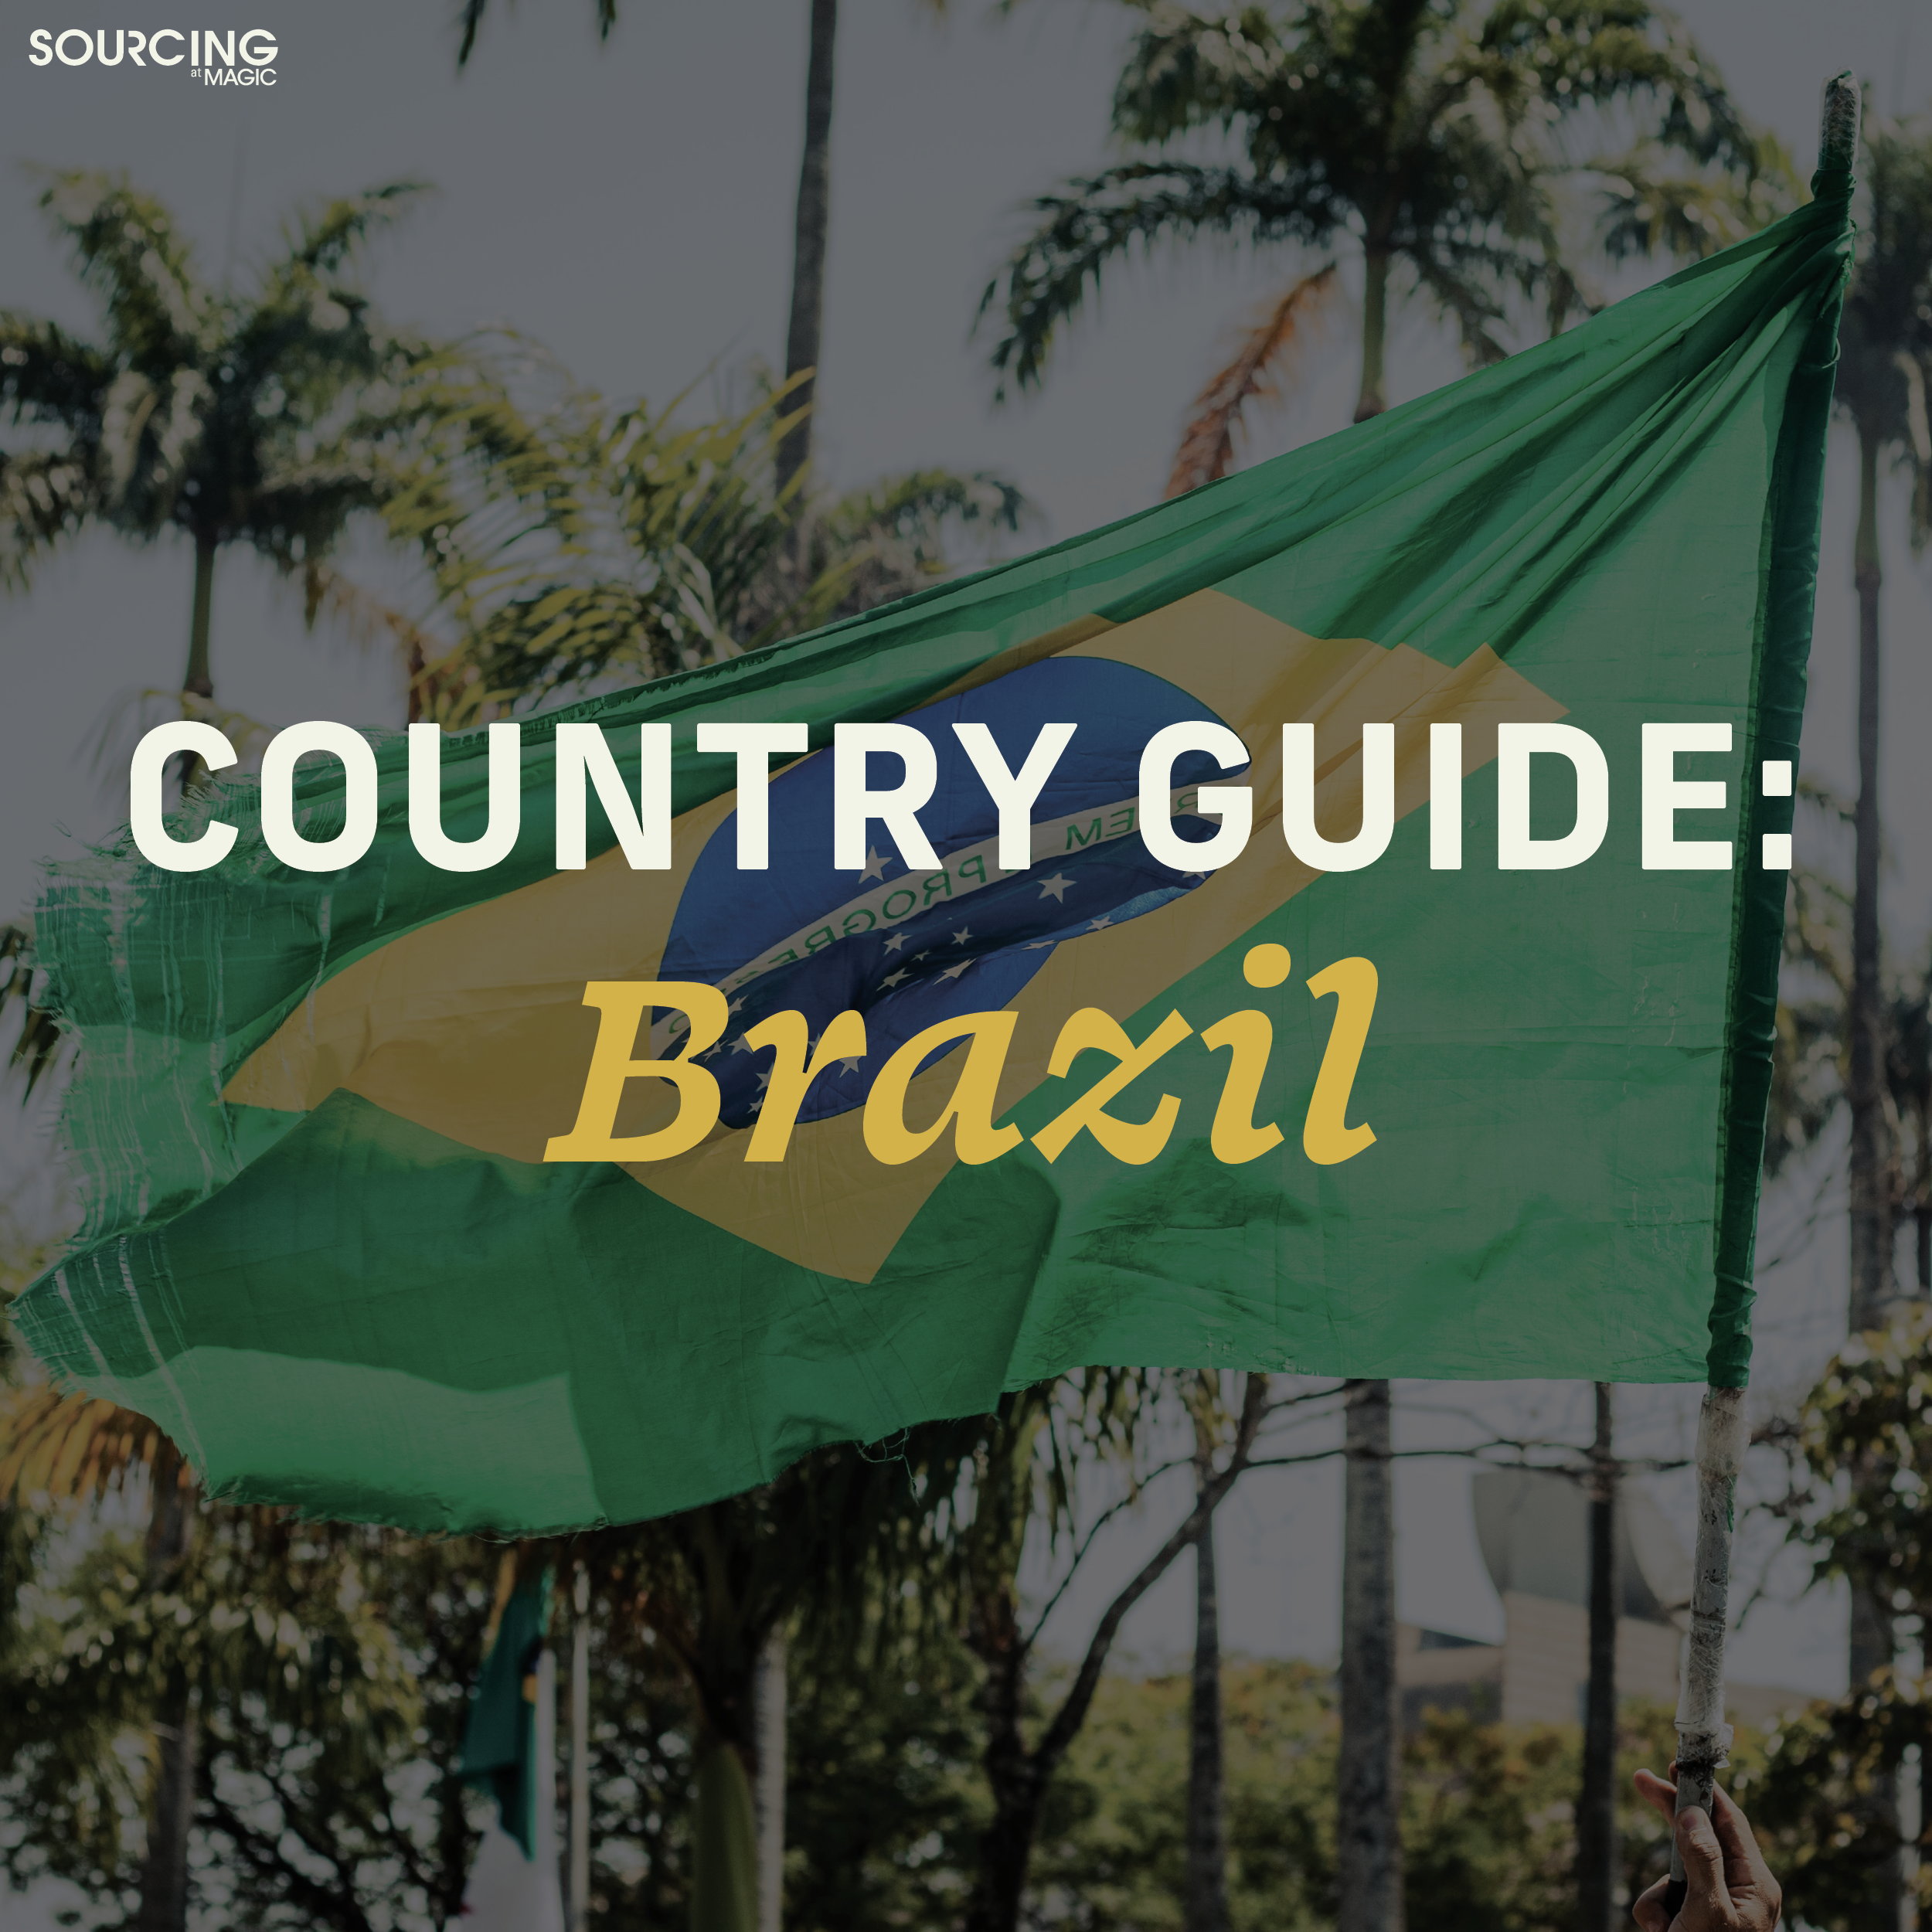 SOURCING at MAGIC: Country Guide - Brazil